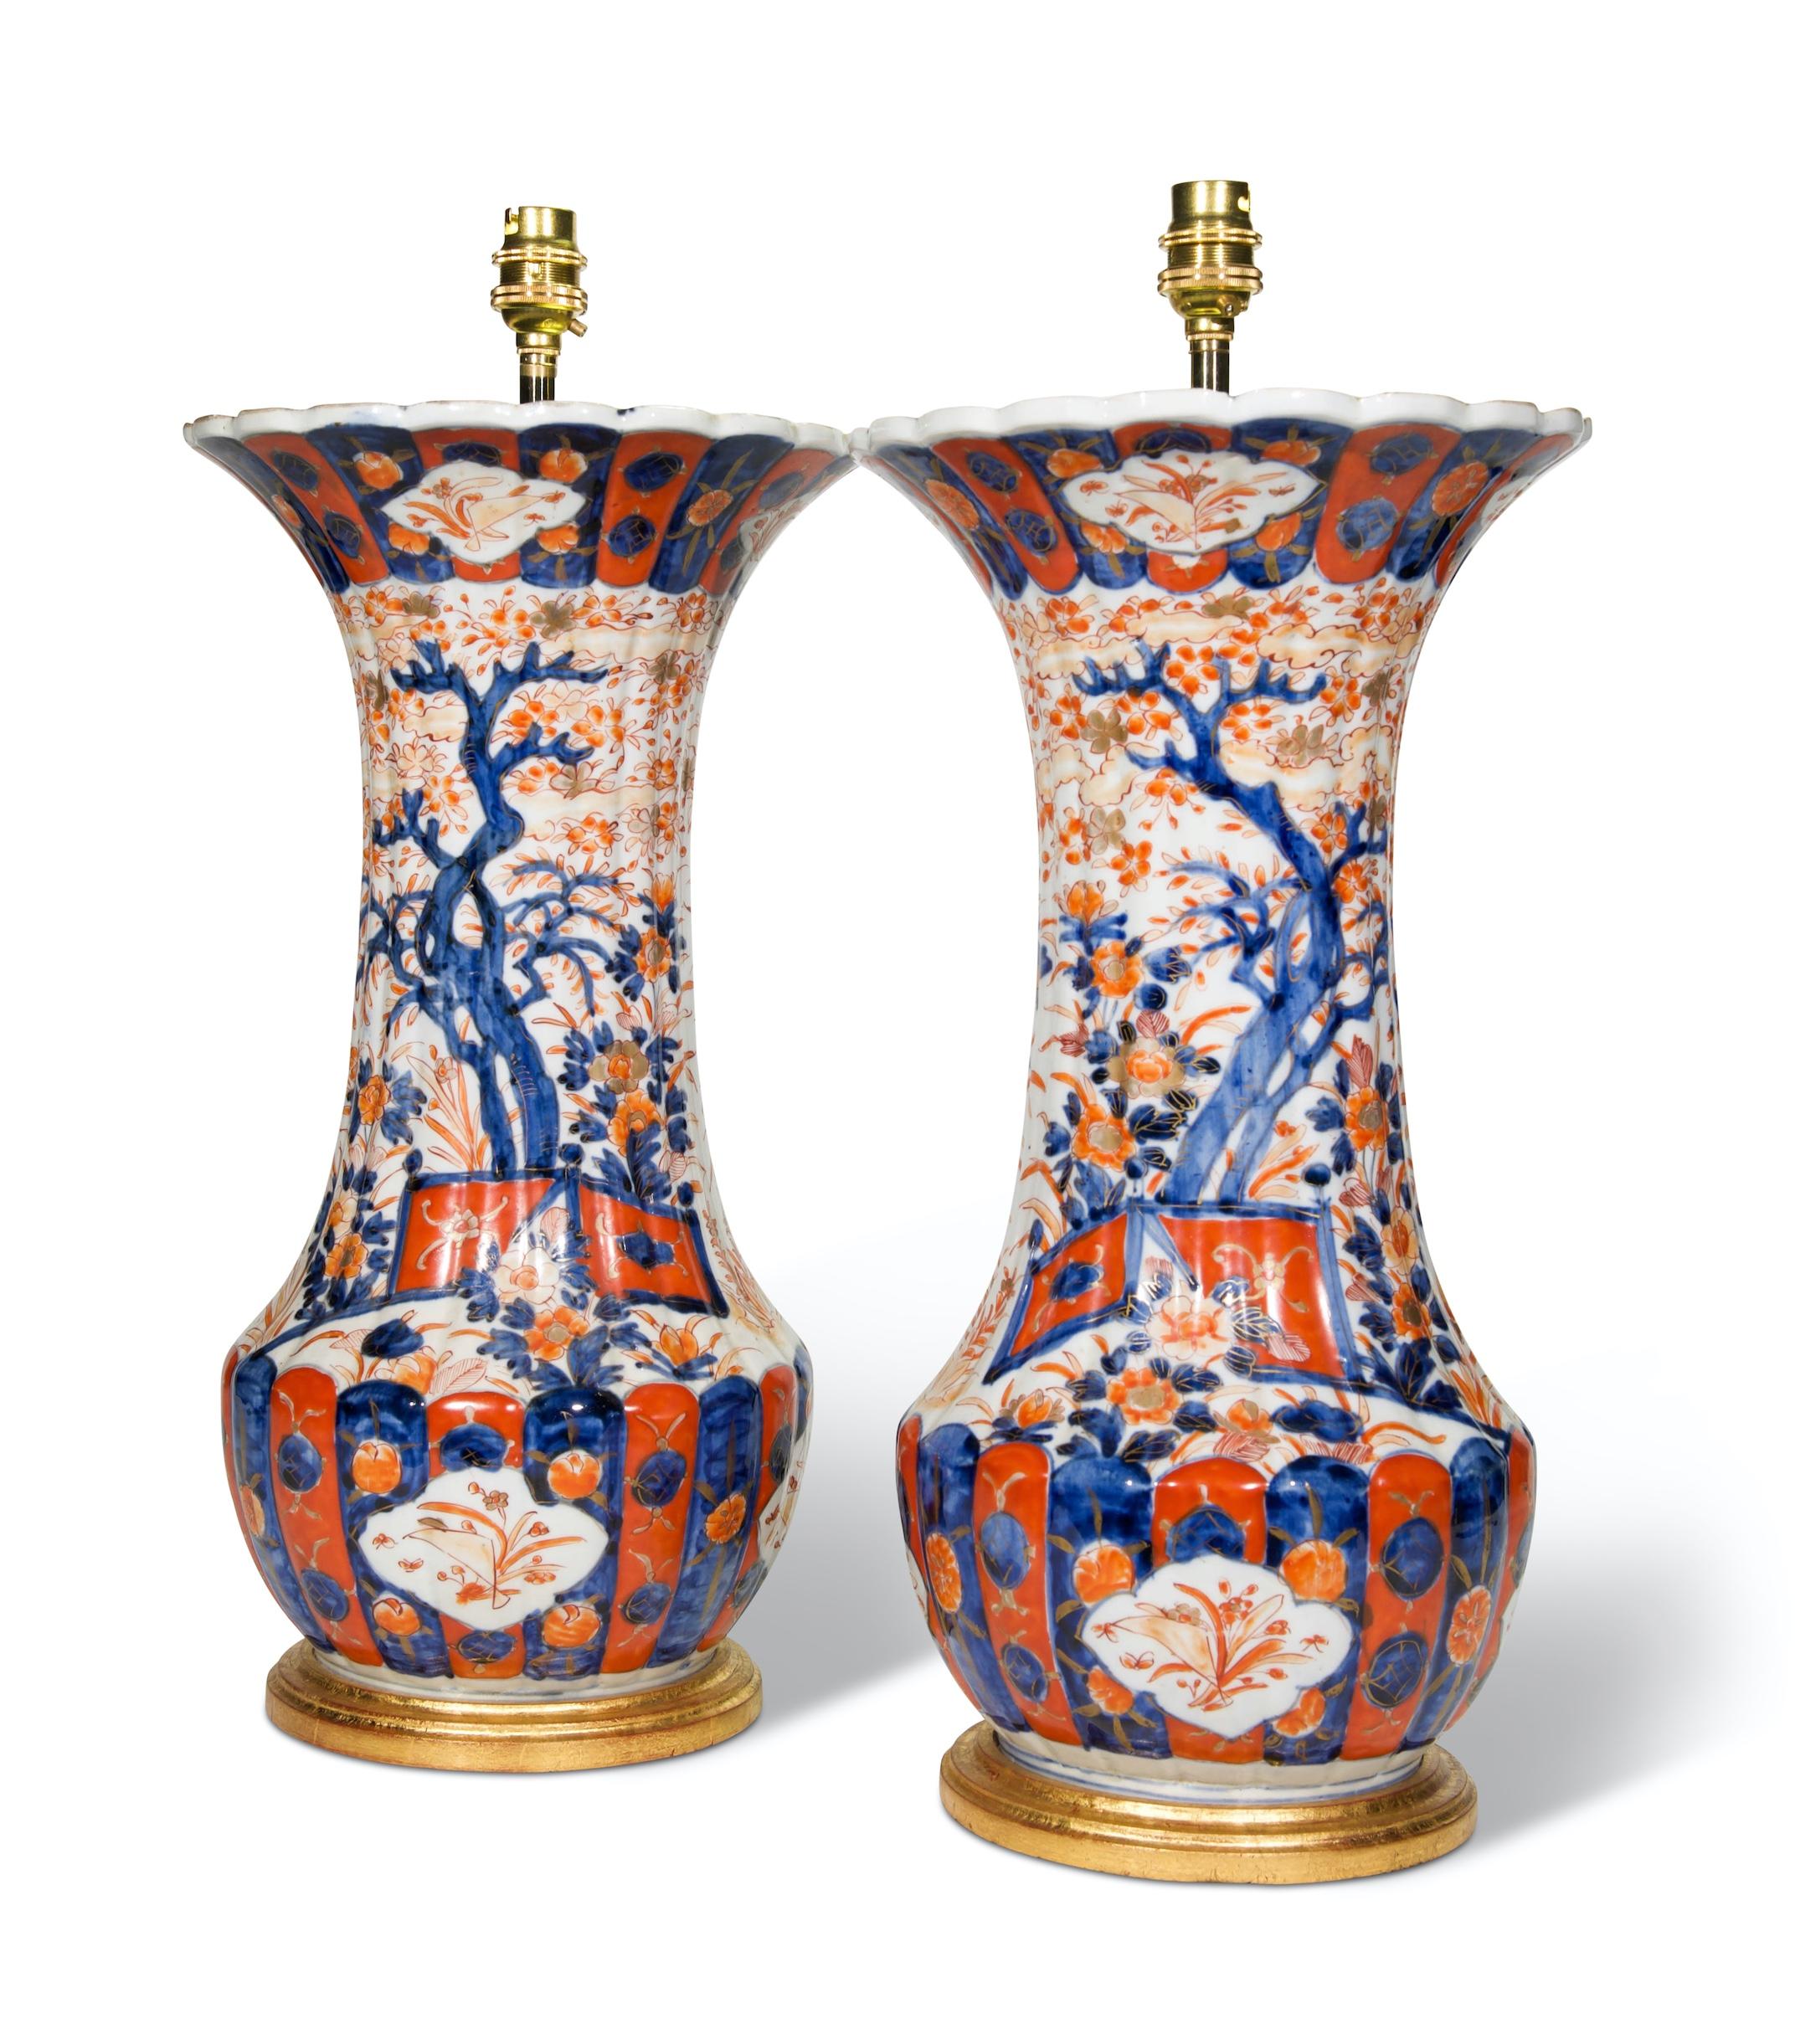 A fine pair of Chinese Imari late 19th century baluster vases, decorated with floral and foliate garden scenes in the typical Imari palette of iron reds and blues with gold highlights on a white background, with ribbed bodies and flared necks. Now